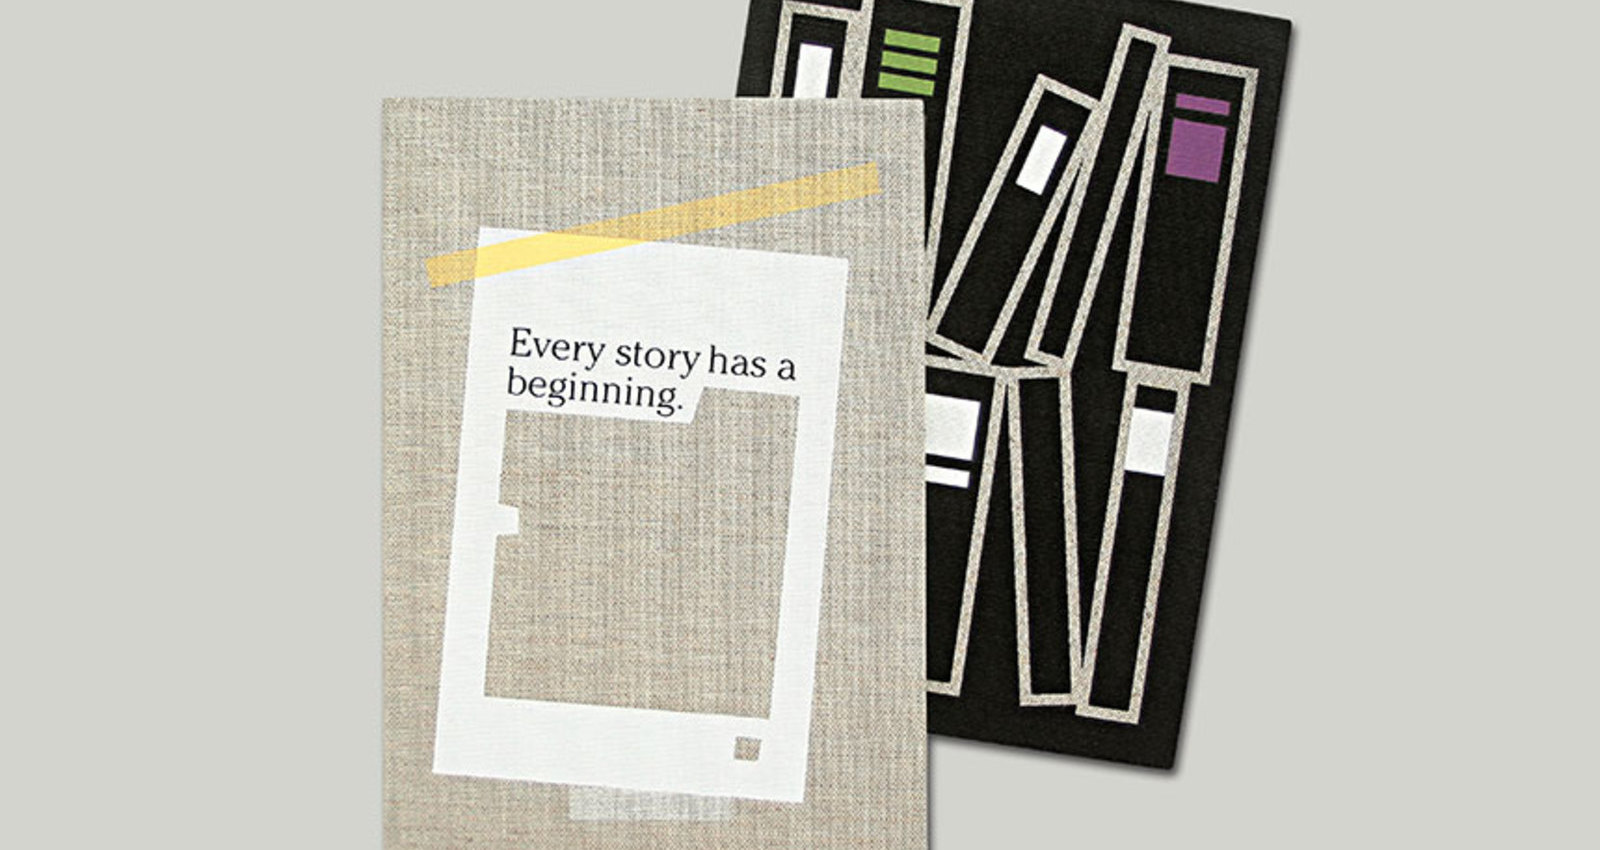 Every story has a beginning